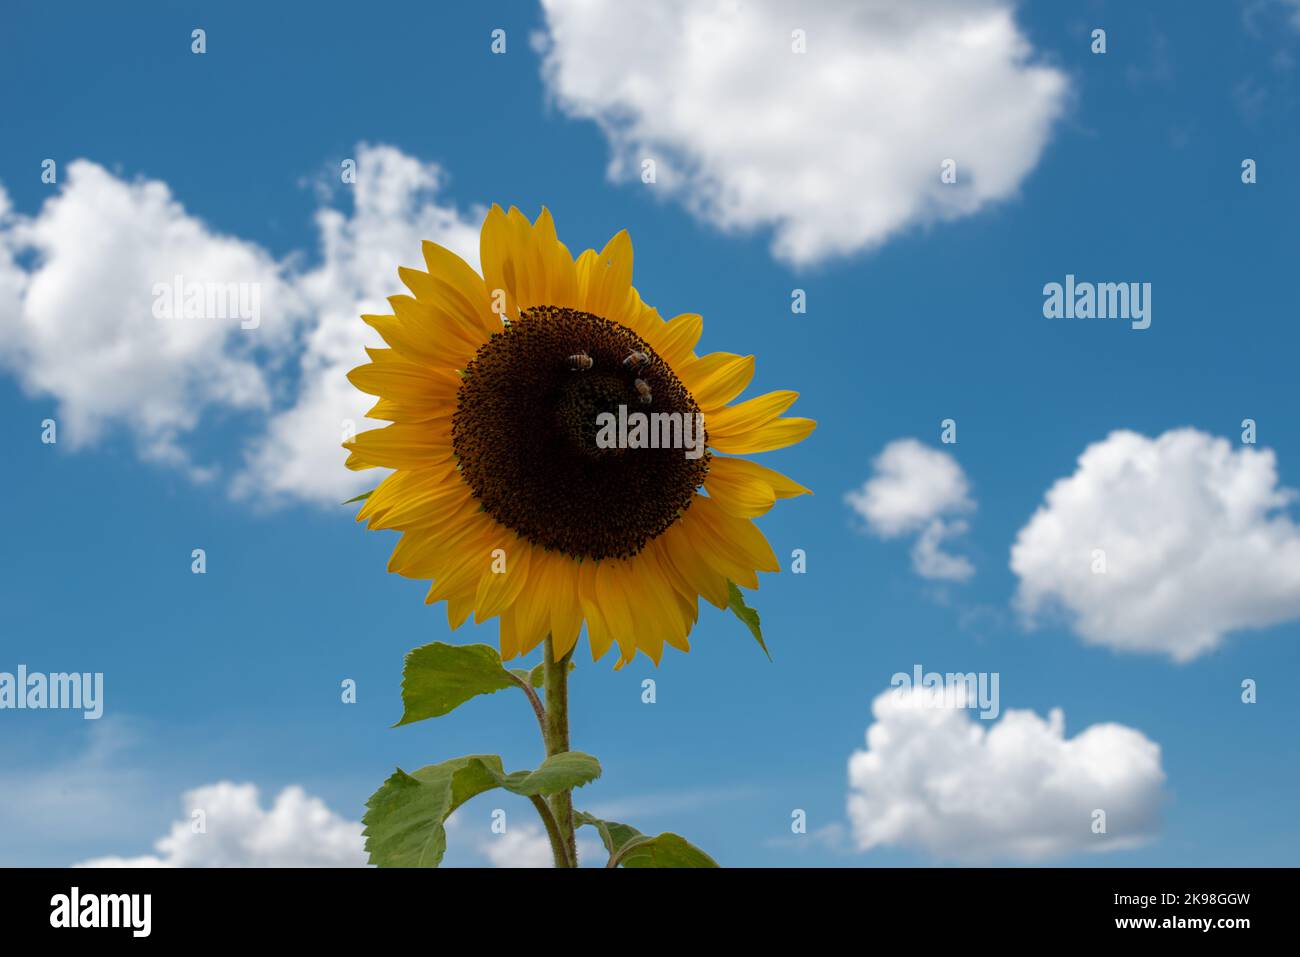 A large sunflower stretches towards the sun in a blue sky. There's a small fly on one of the pedals of the flower. The pedals are bright yellow. Stock Photo